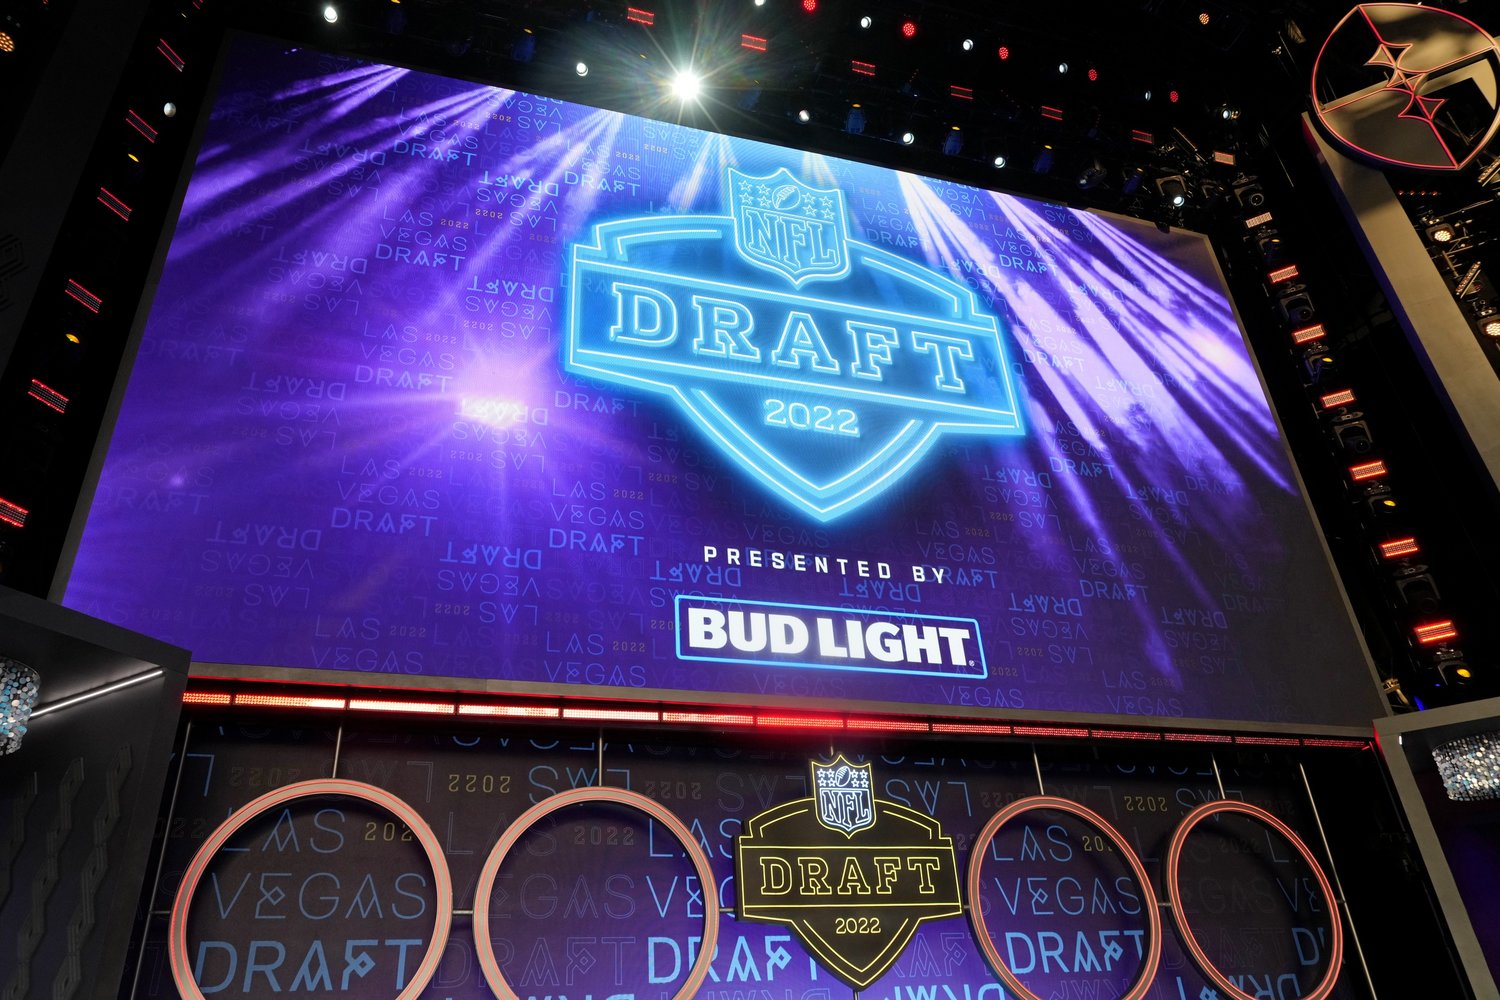 April 28, 2022 - Las Vegas, NV: The 2022 NFL Draft logo is displayed during the first round of the 2022 NFL Draft at the NFL Draft Theater. (Photo by Kirby Lee / USA TODAY Sports)